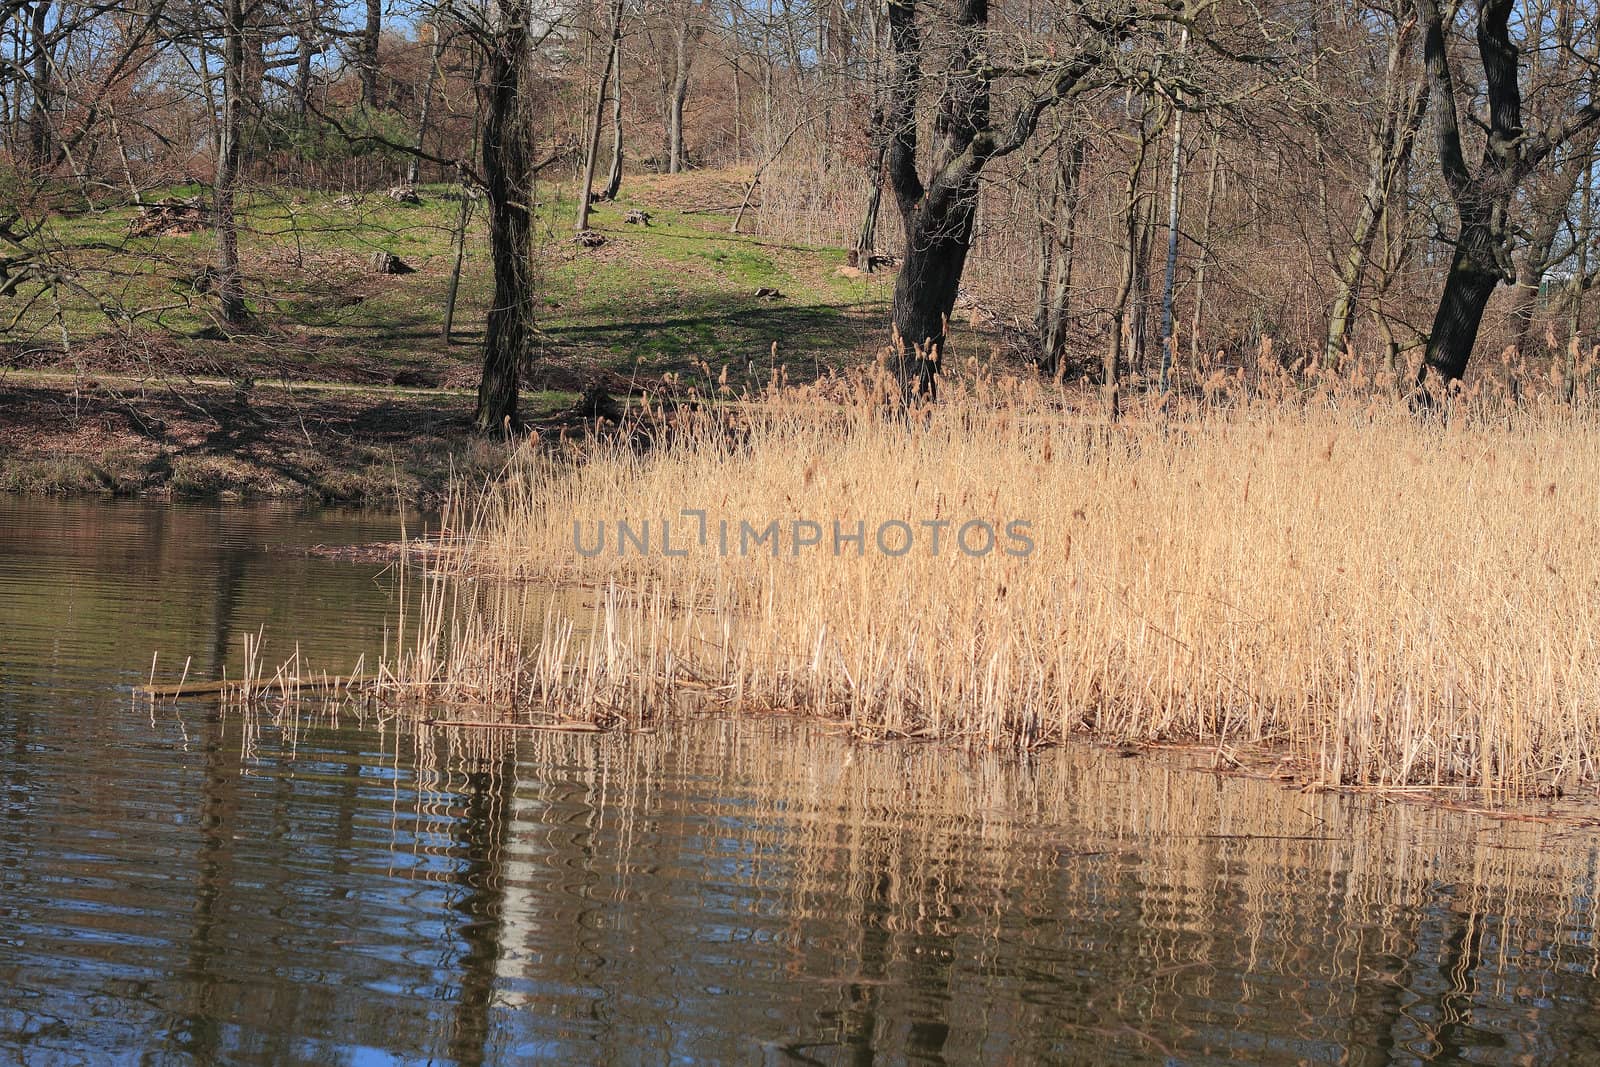 Reeds in a lake in early spring